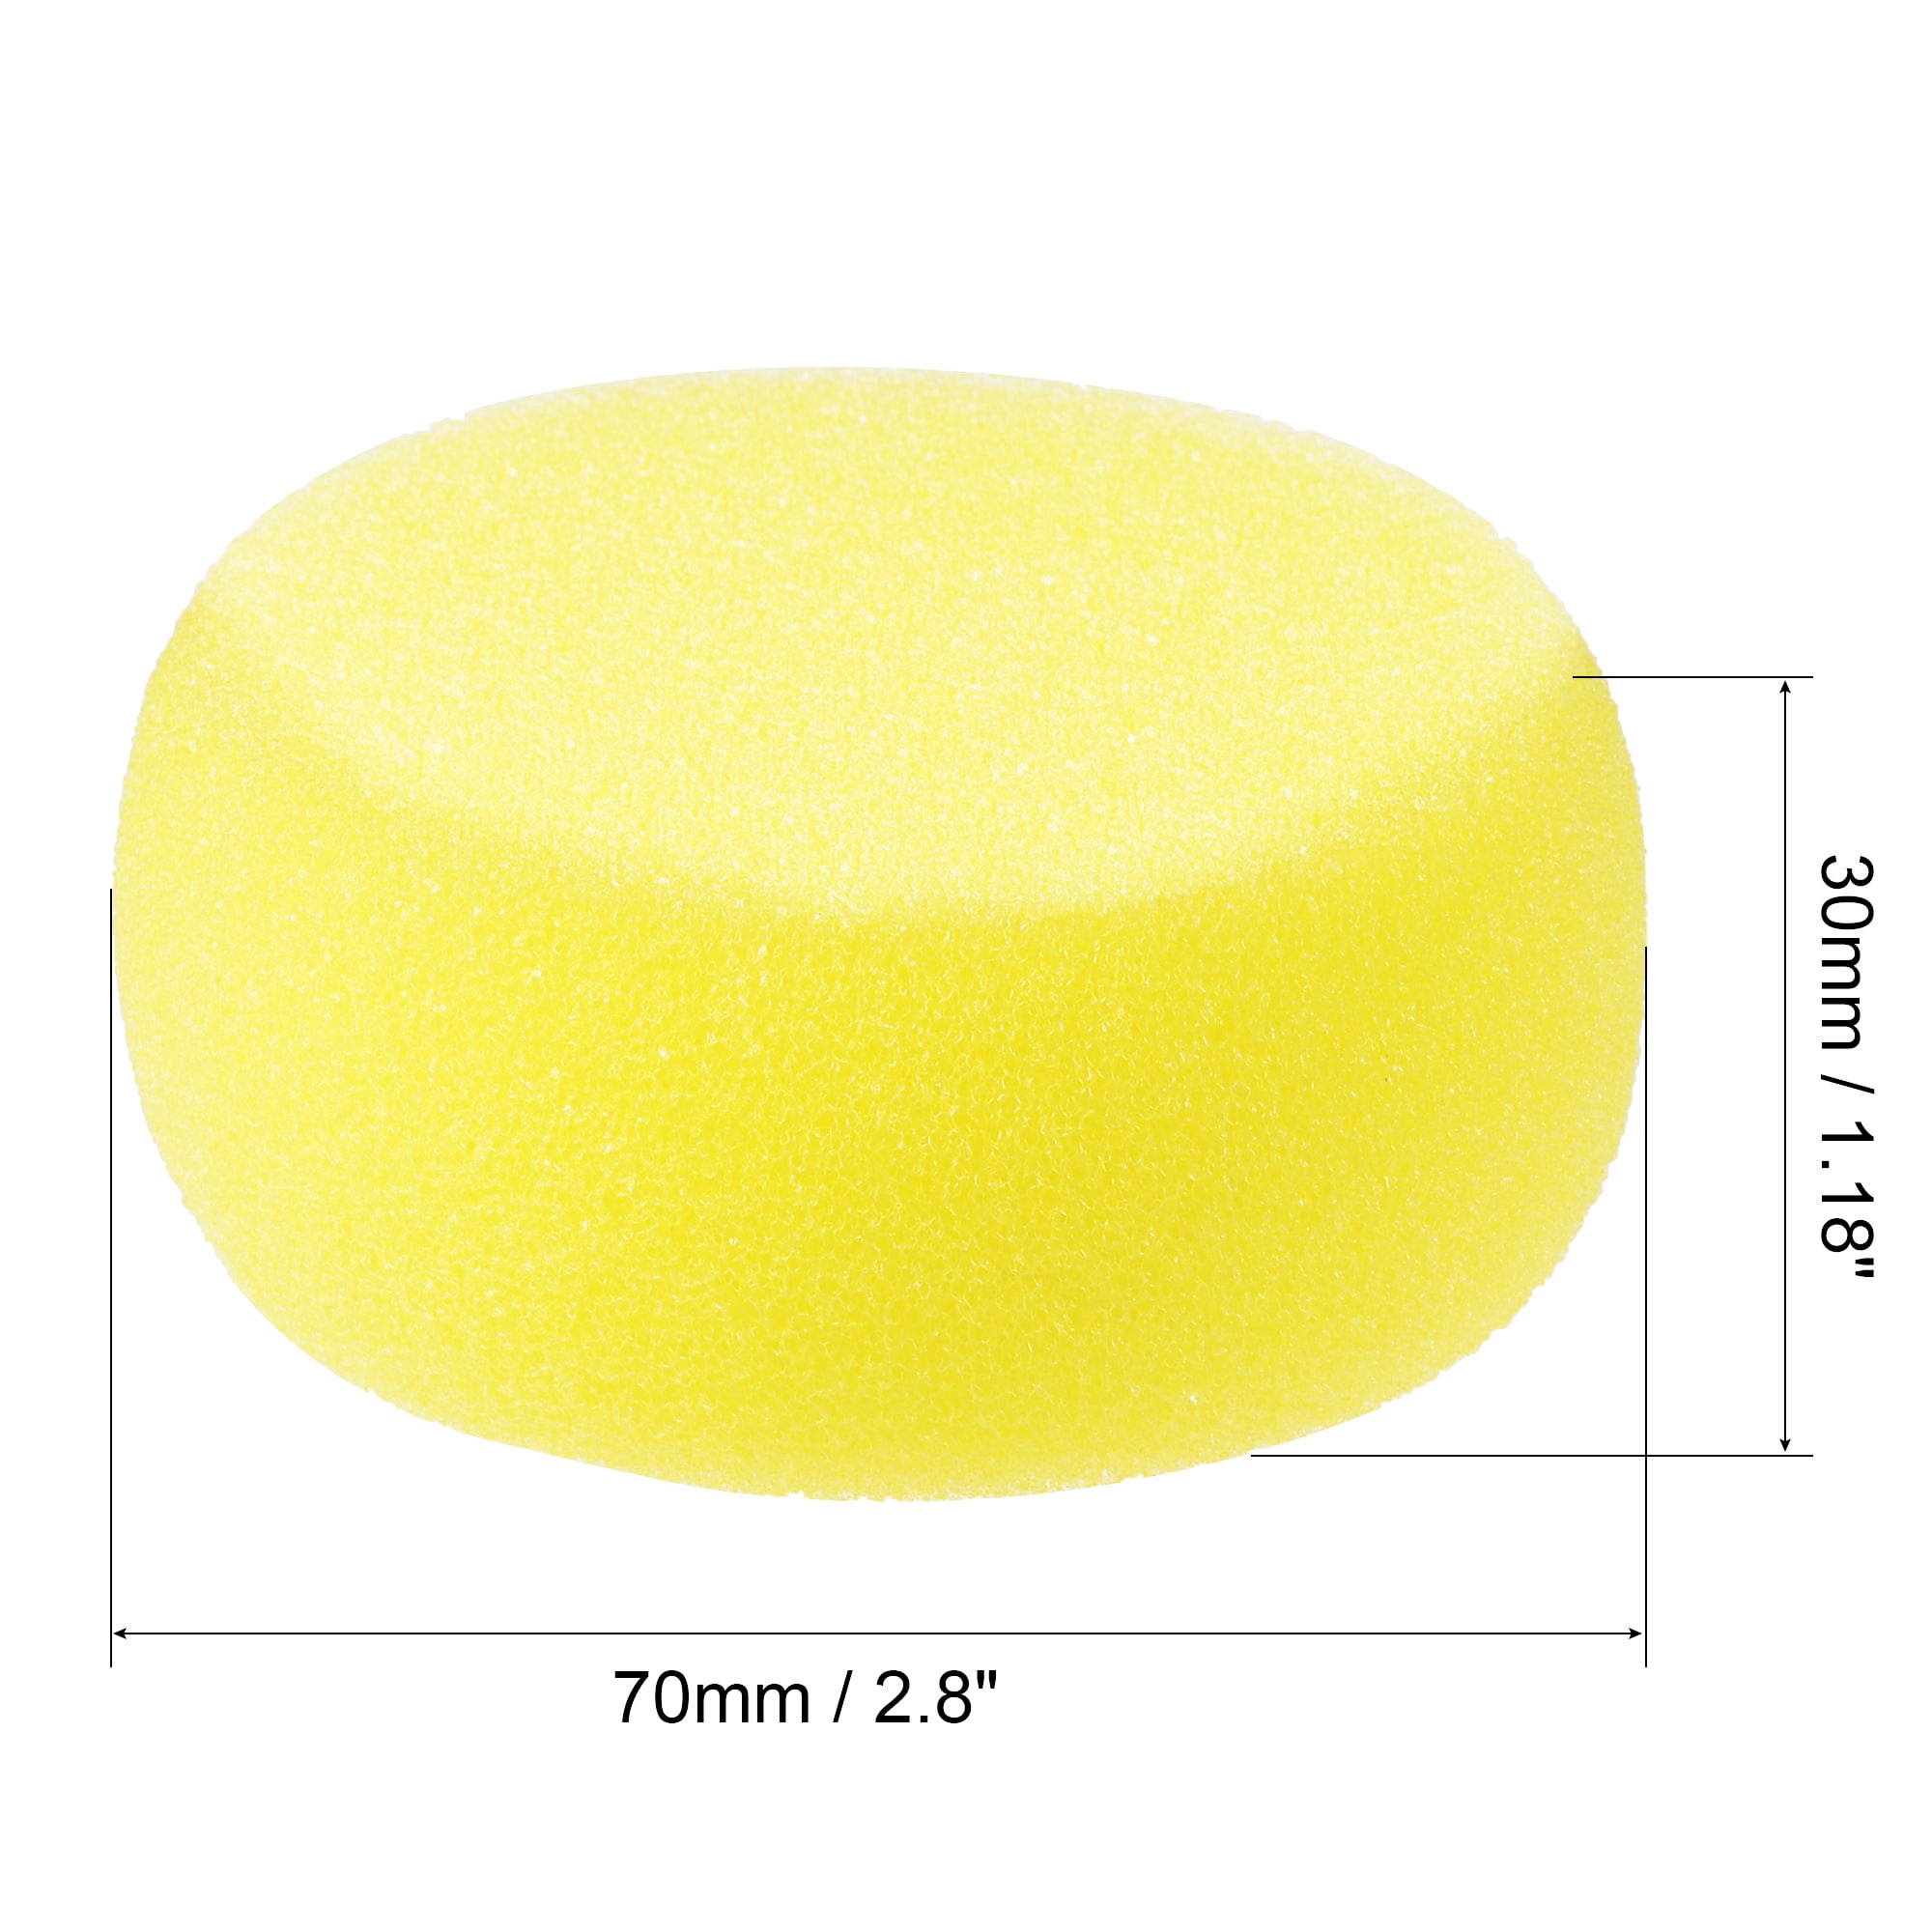 Knockdown Texture Sponge 2.8 Faux Painting Supply Wall Texturing 6Pcs -  Yellow - Bed Bath & Beyond - 35708795